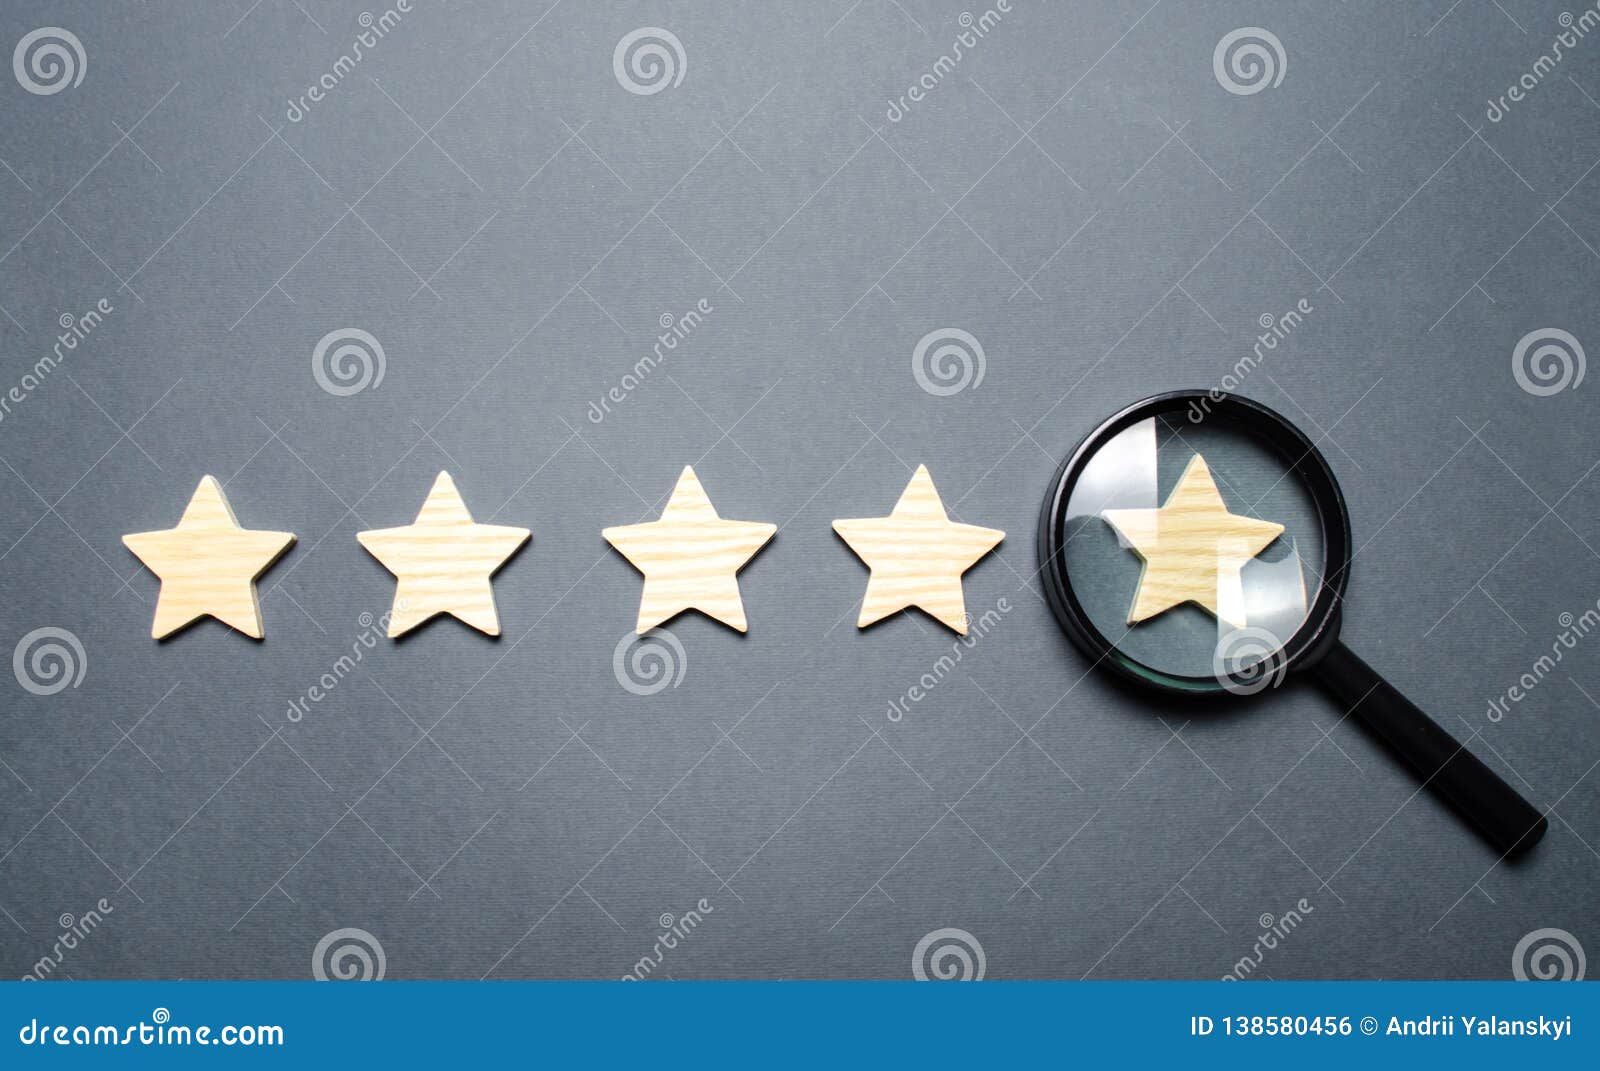 five stars and a magnifying glass on the last star. check the credibility of the rating or status of the institution, hotel